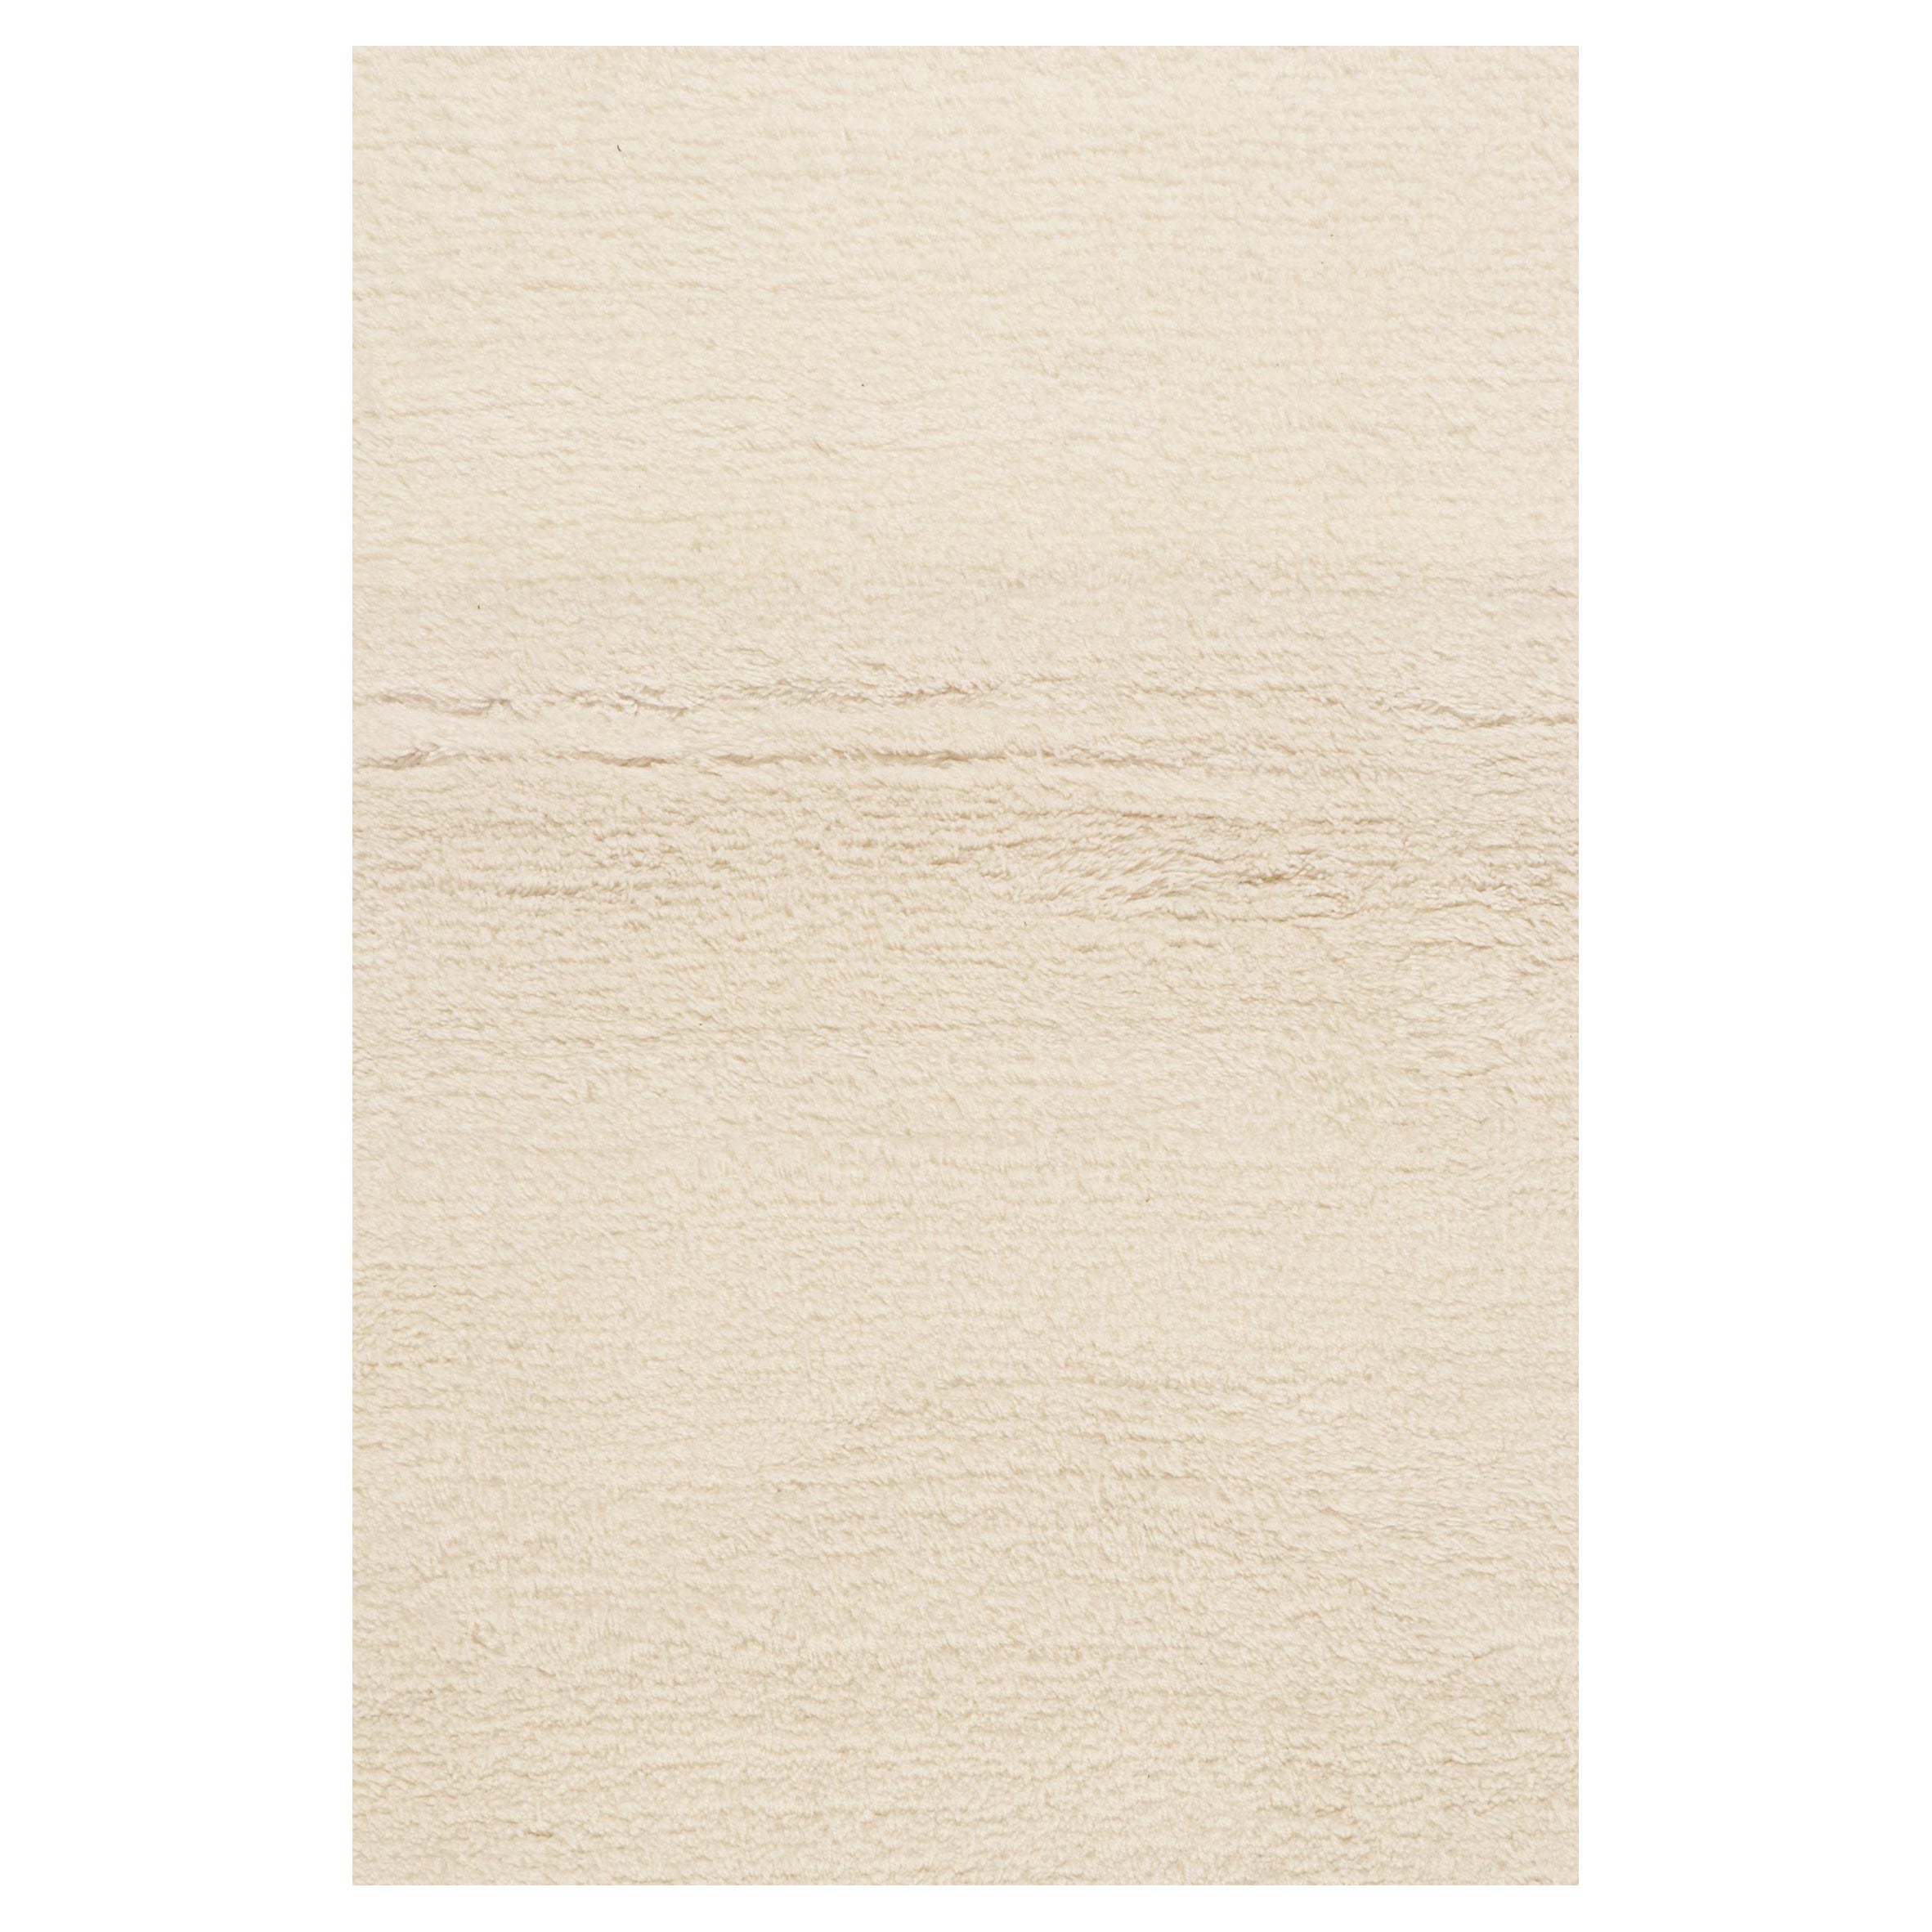 This contemporary 12x17 solid rug is a new addition to Rug & Kilim's Texture of Color Collection. Hand-knotted in all-natural wool.

Further on the Design:

This delicious blend of luxurious ivory and off-white tones further enjoys a subtle sheen